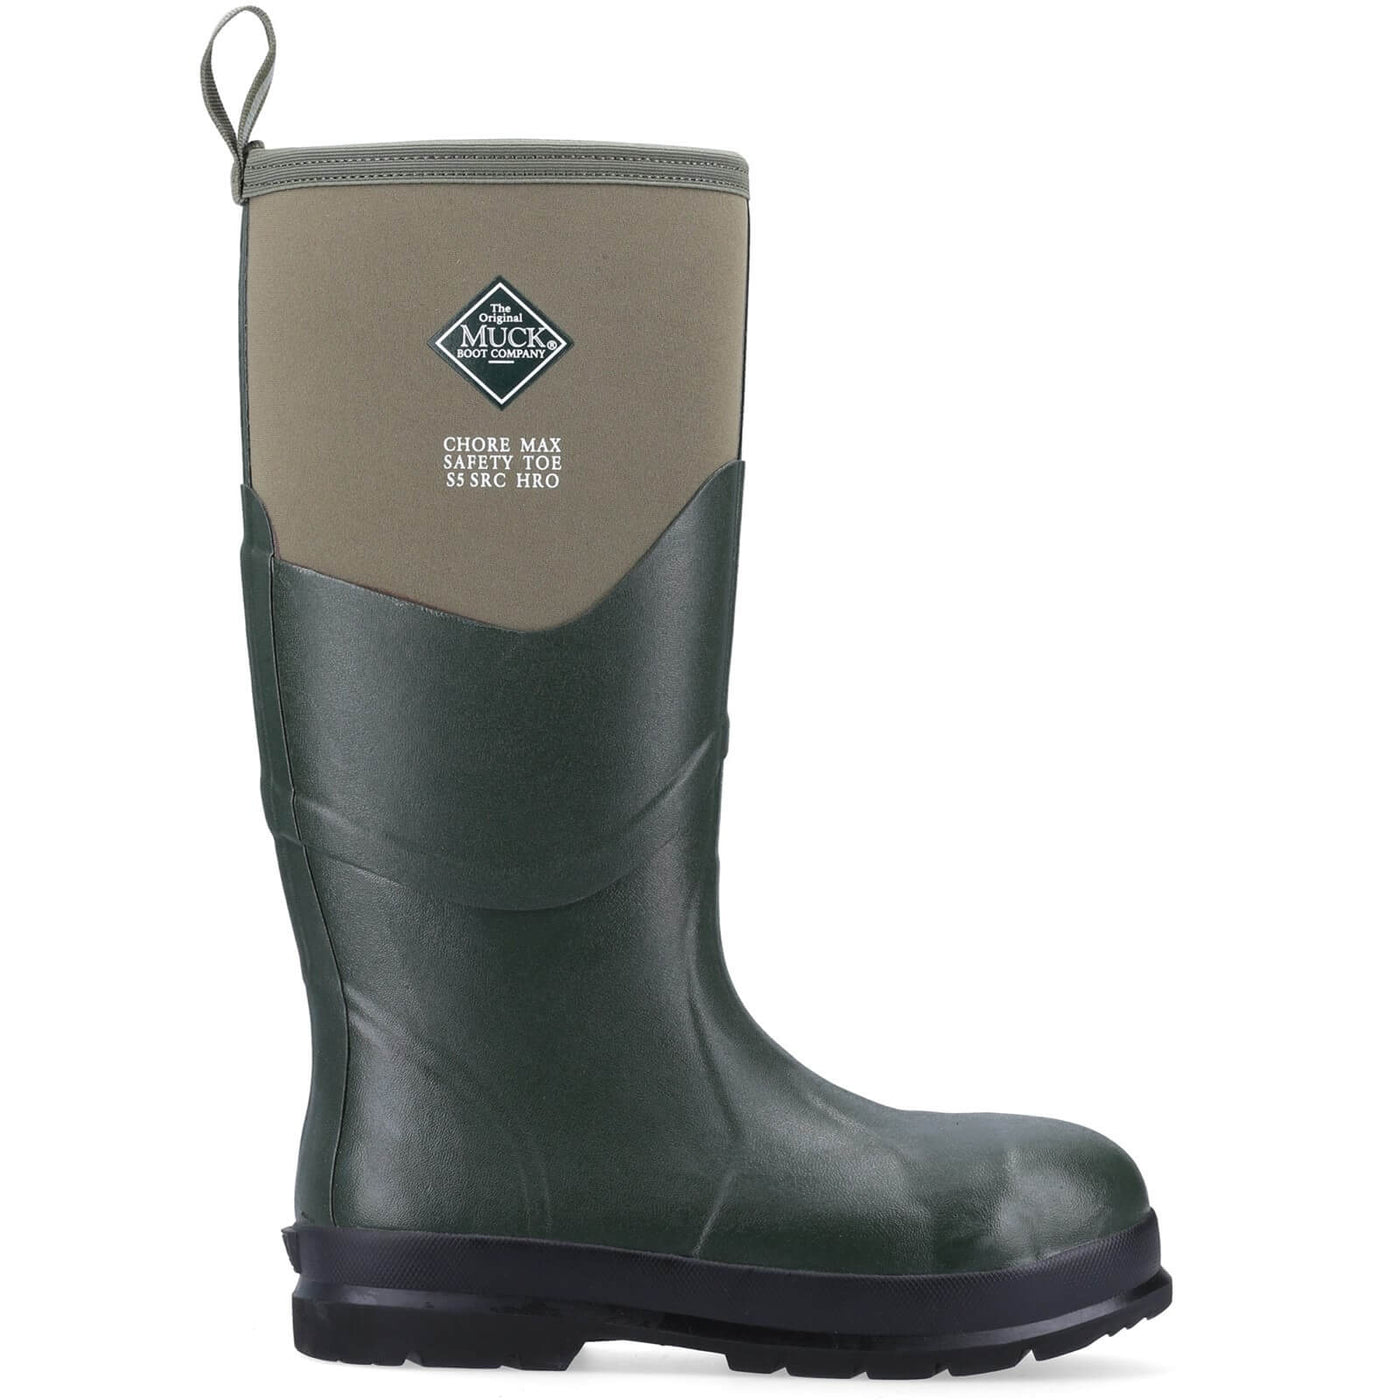 Muck Boots Chore Max S5 Safety Wellies Moss 5#colour_moss